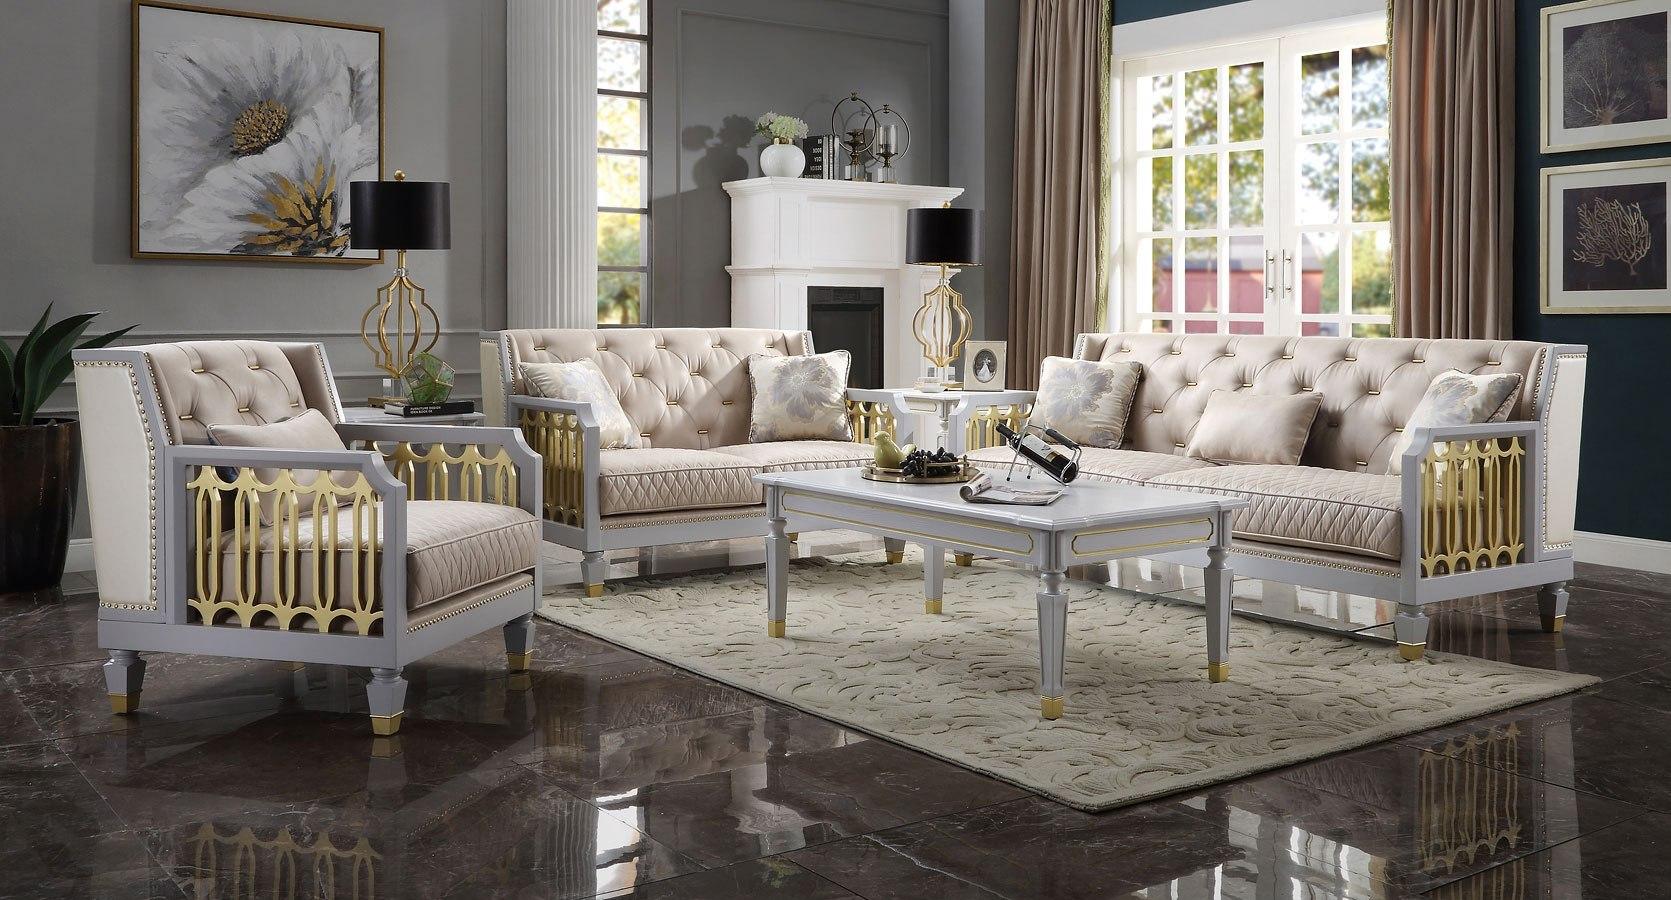 

    
Classic Gold & Pearl Gray Living Room Set w/ Coffee Tables by Acme House Marchese 58865-6pcs
